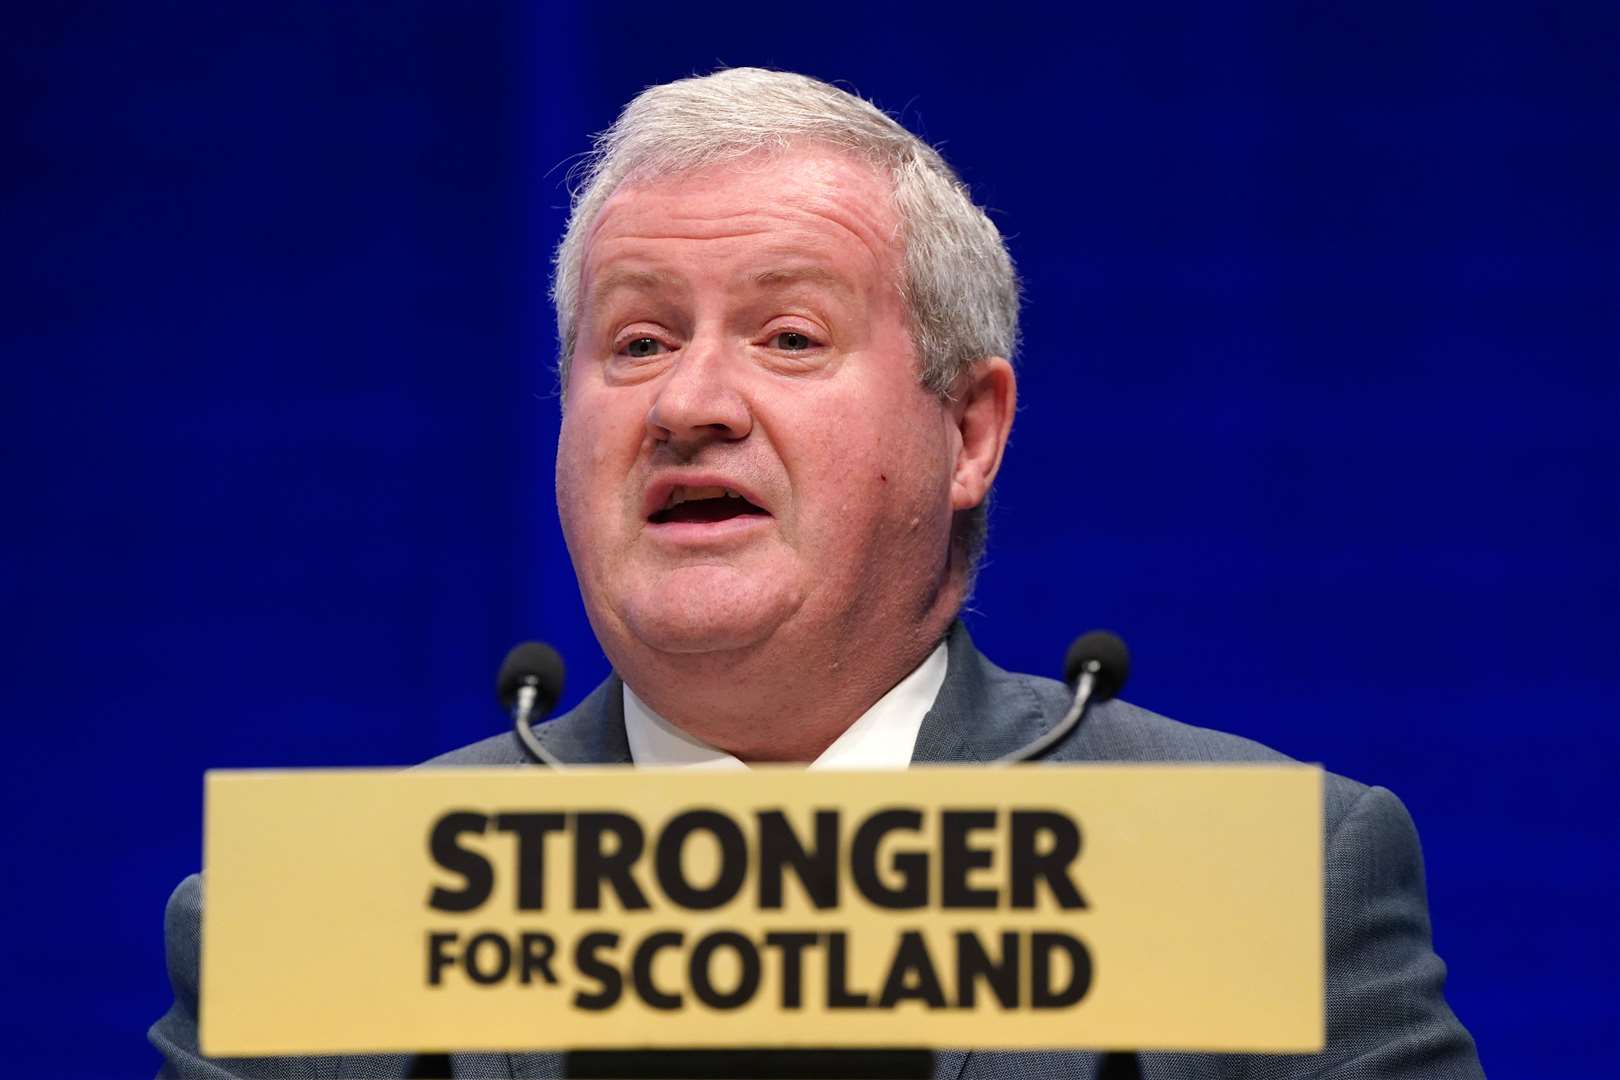 Ian Blackford was heard on a recording urging MPs to support Mr Grady during his suspension from the party (Andrew Milligan/PA)